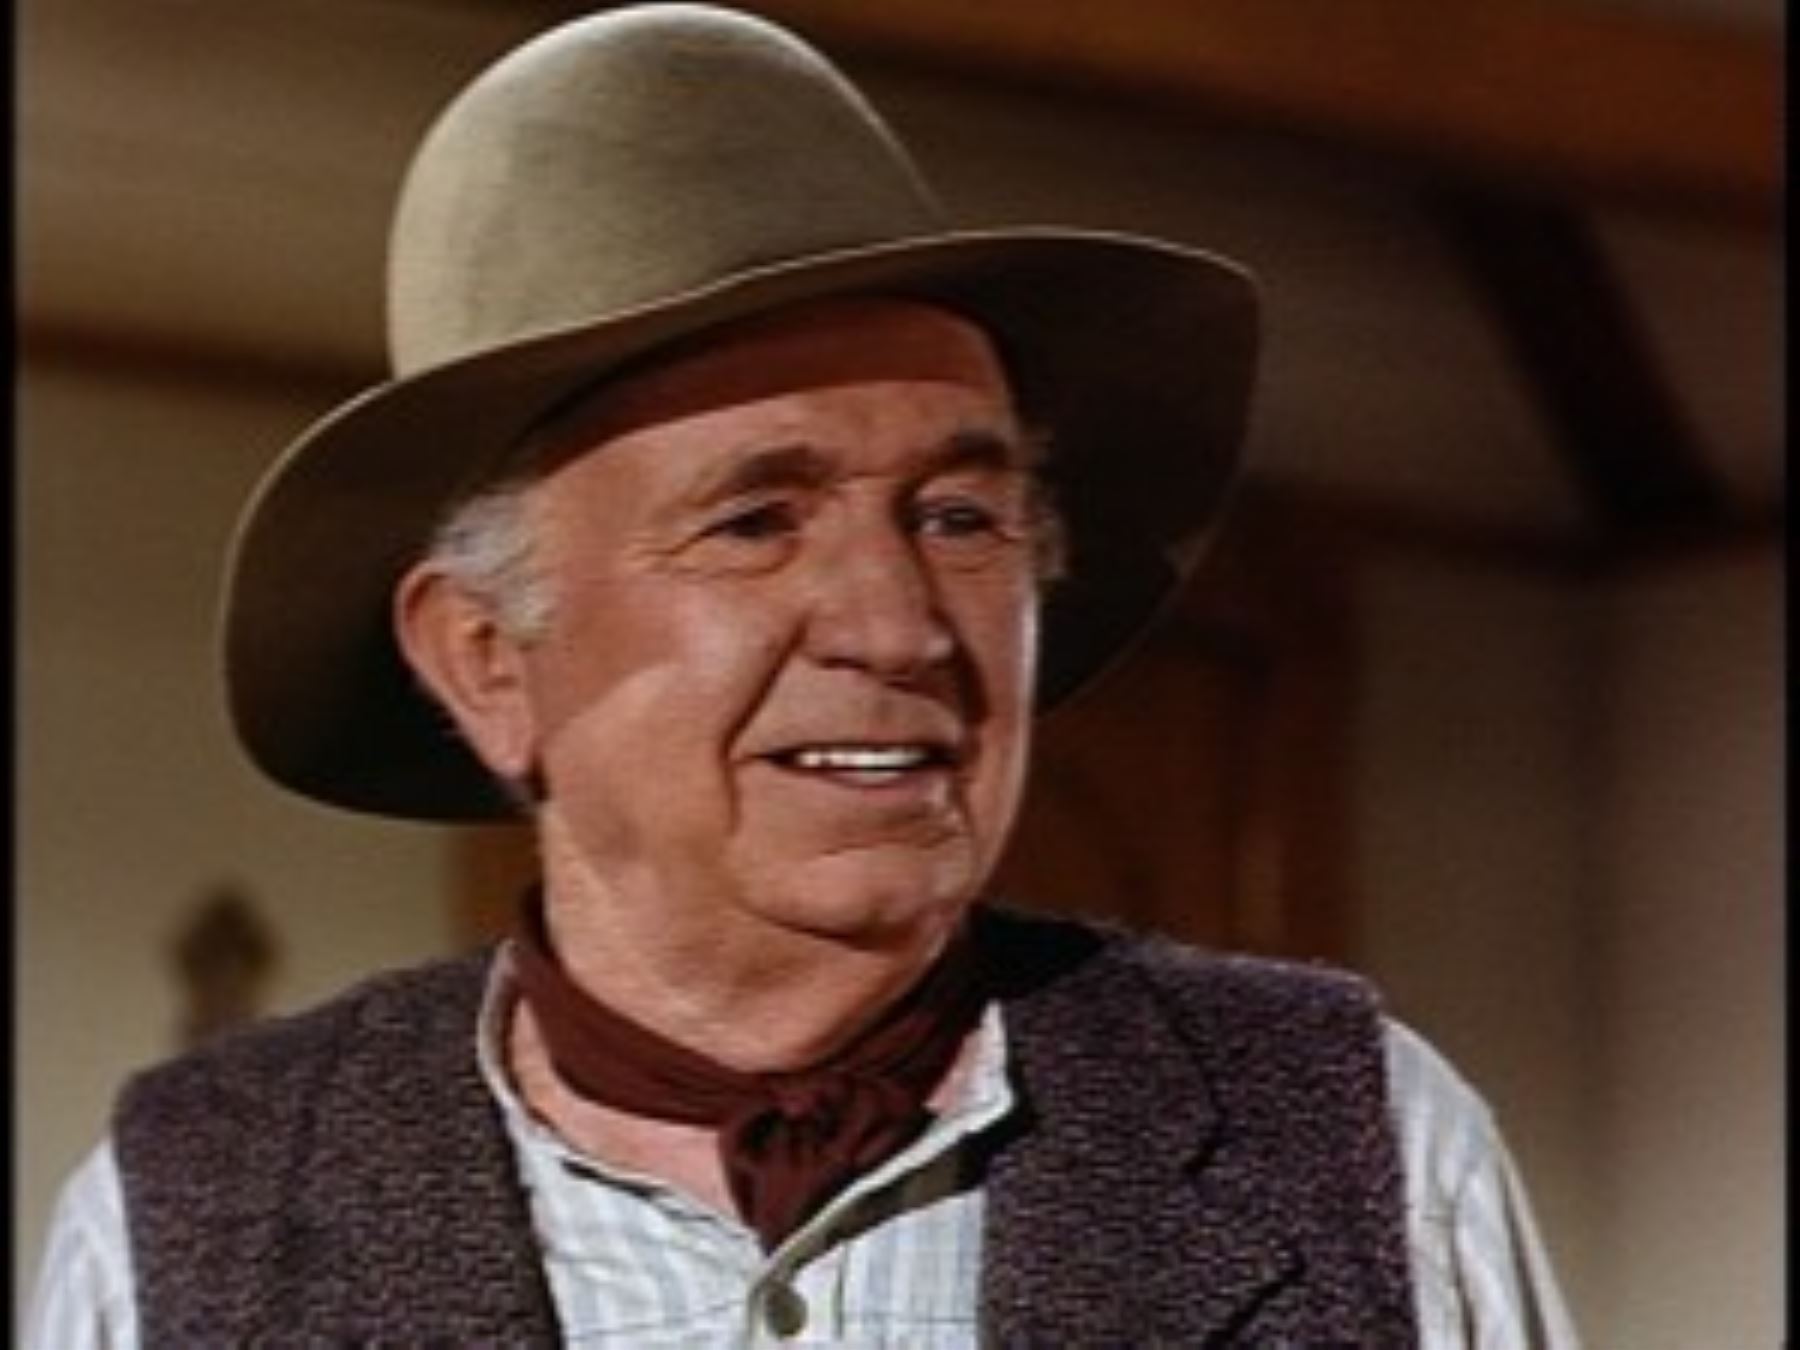 More Pictures Of Walter Brennan. walter brennan images. 